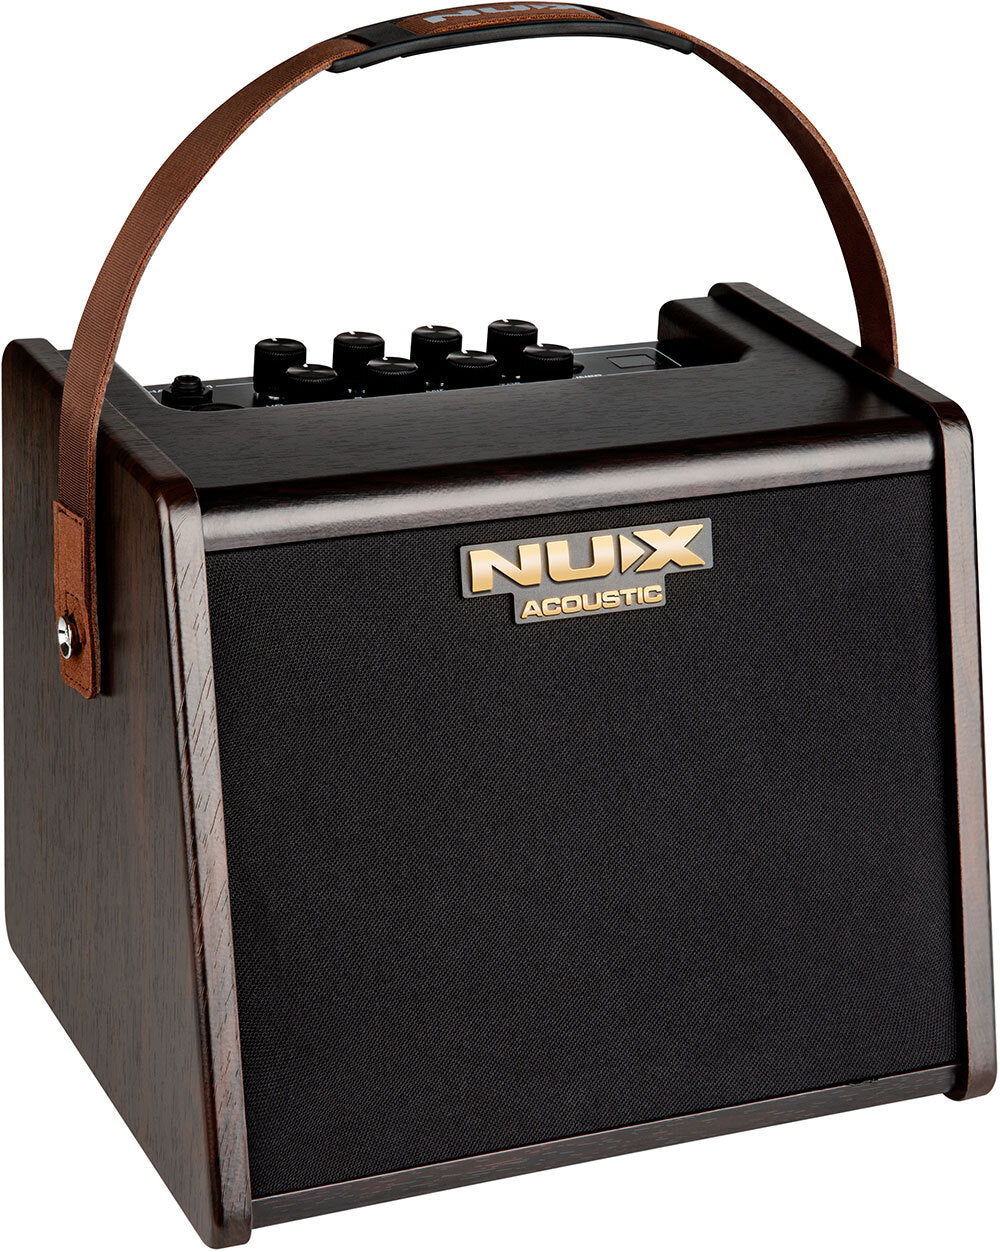 NU-X AC25 Stageman Battery Powered Acoustic Amplifier